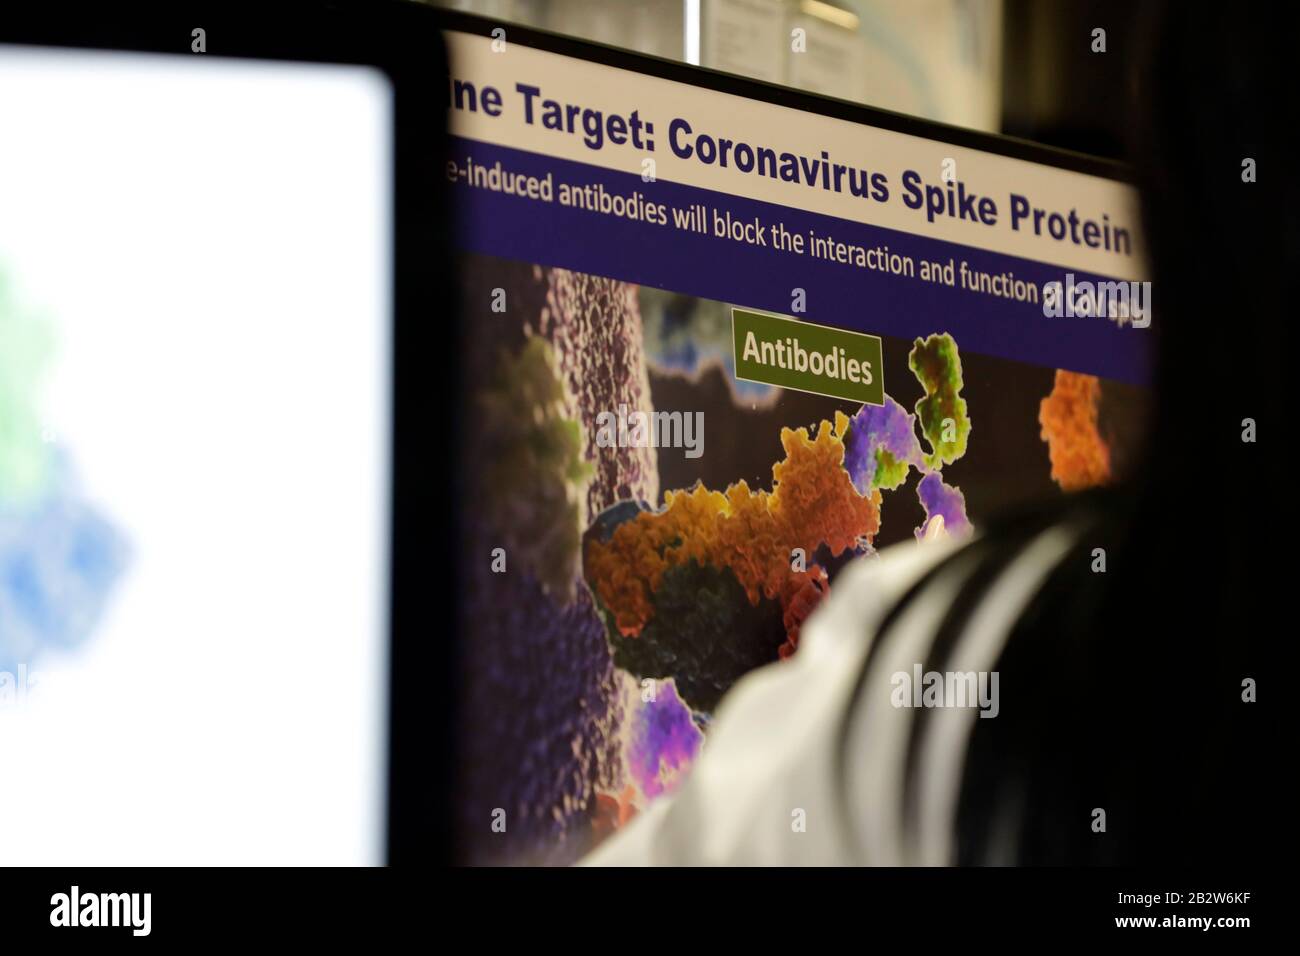 Model of a coronavirus Spike Protein on a computer screen as United States President Donald J. Trump tours the Viral Pathogenesis Laboratory at National Institutes of Health ñ Vaccine Research Center in Bethesda, Maryland on March 3, 2020. Credit: Yuri Gripas/Pool via CNP /MediaPunch Stock Photo